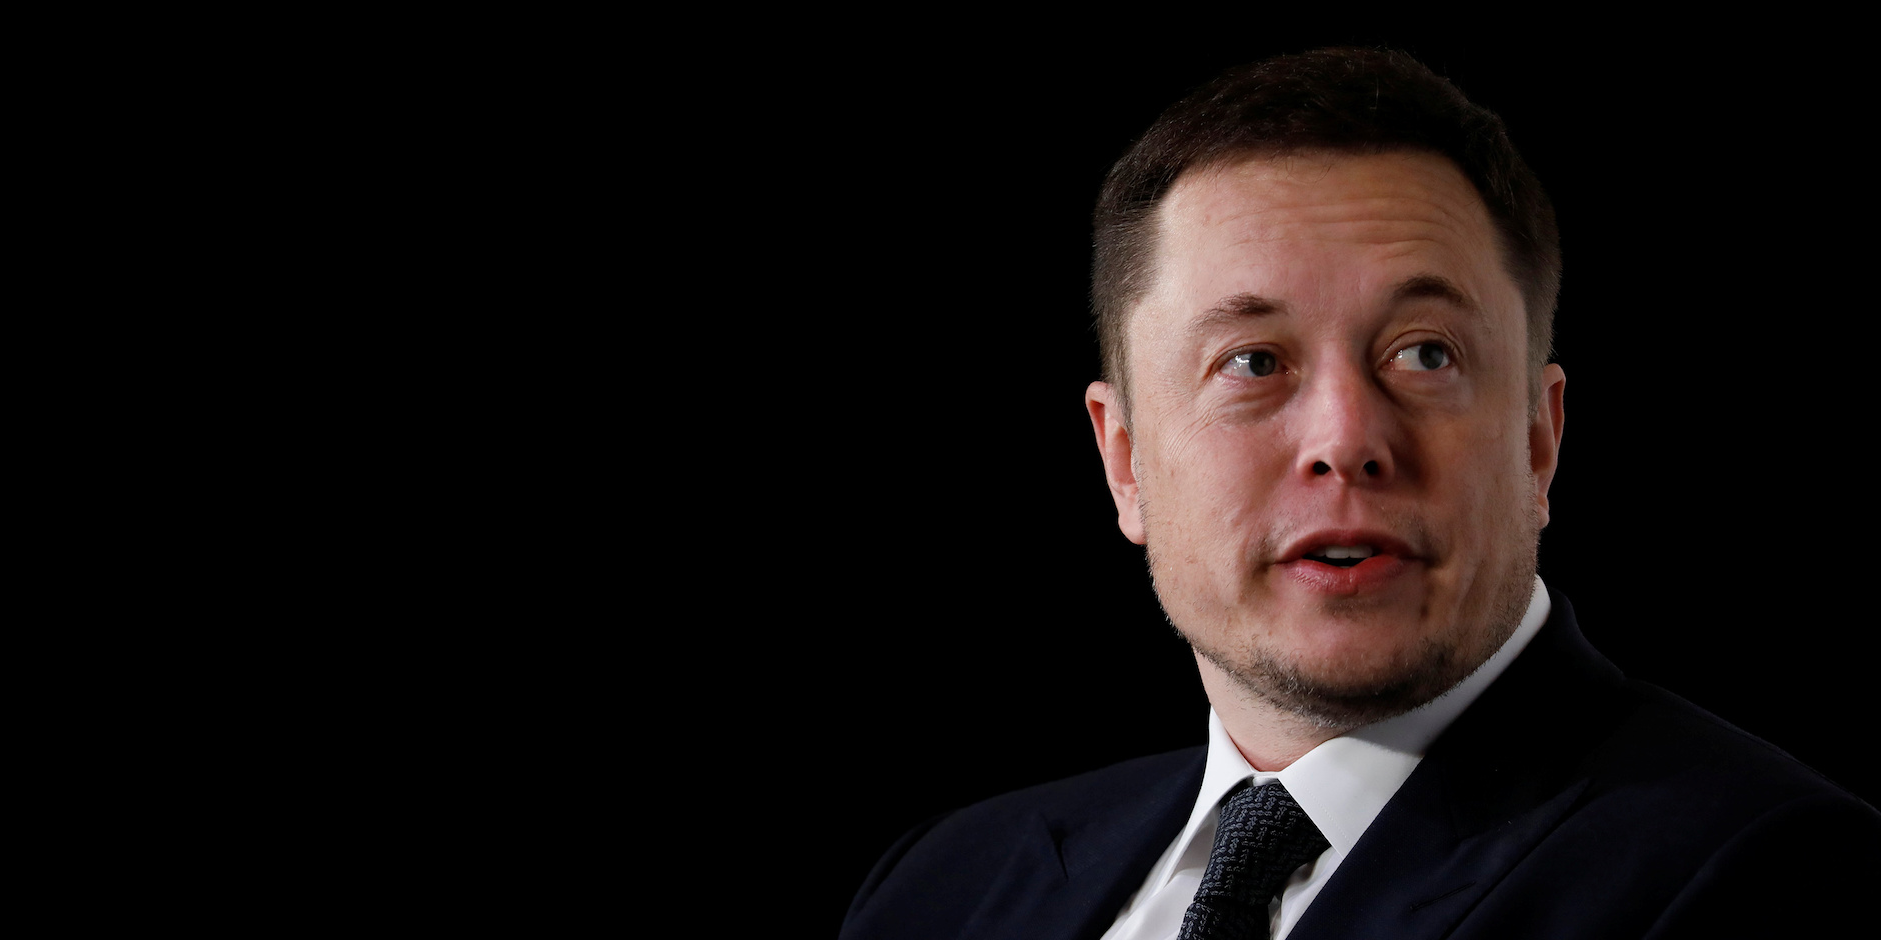 Elon Musk told Tesla employees in a leaked email that they don’t have to go to work if they’re sick or worried about the coronavirus (TSLA)